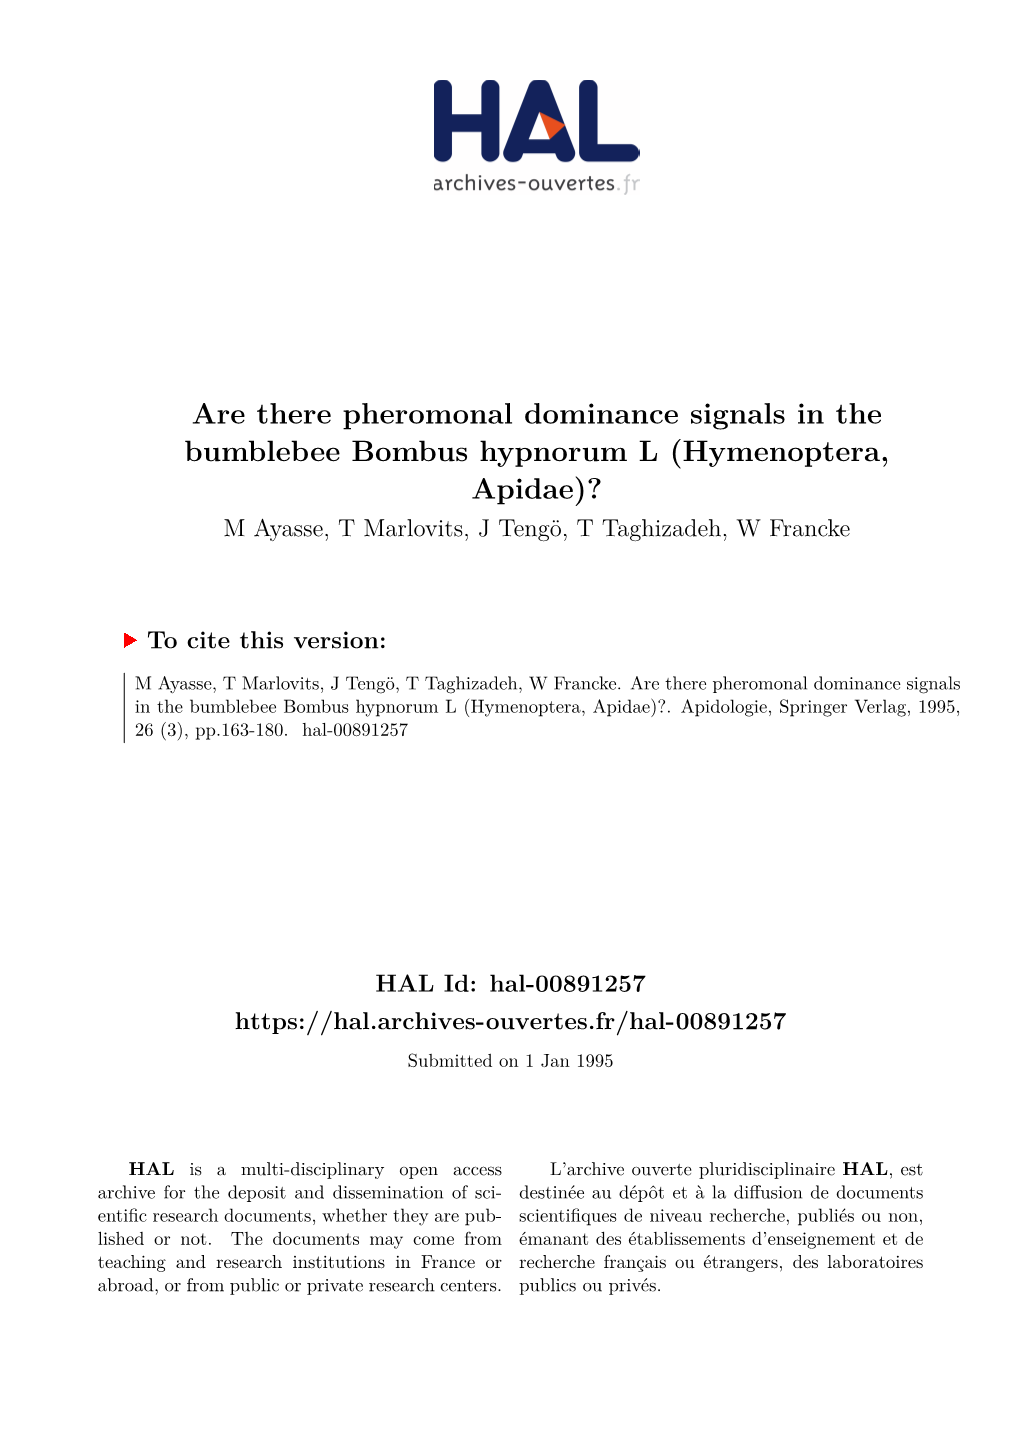 Are There Pheromonal Dominance Signals in the Bumblebee Bombus Hypnorum L (Hymenoptera, Apidae)? M Ayasse, T Marlovits, J Tengö, T Taghizadeh, W Francke